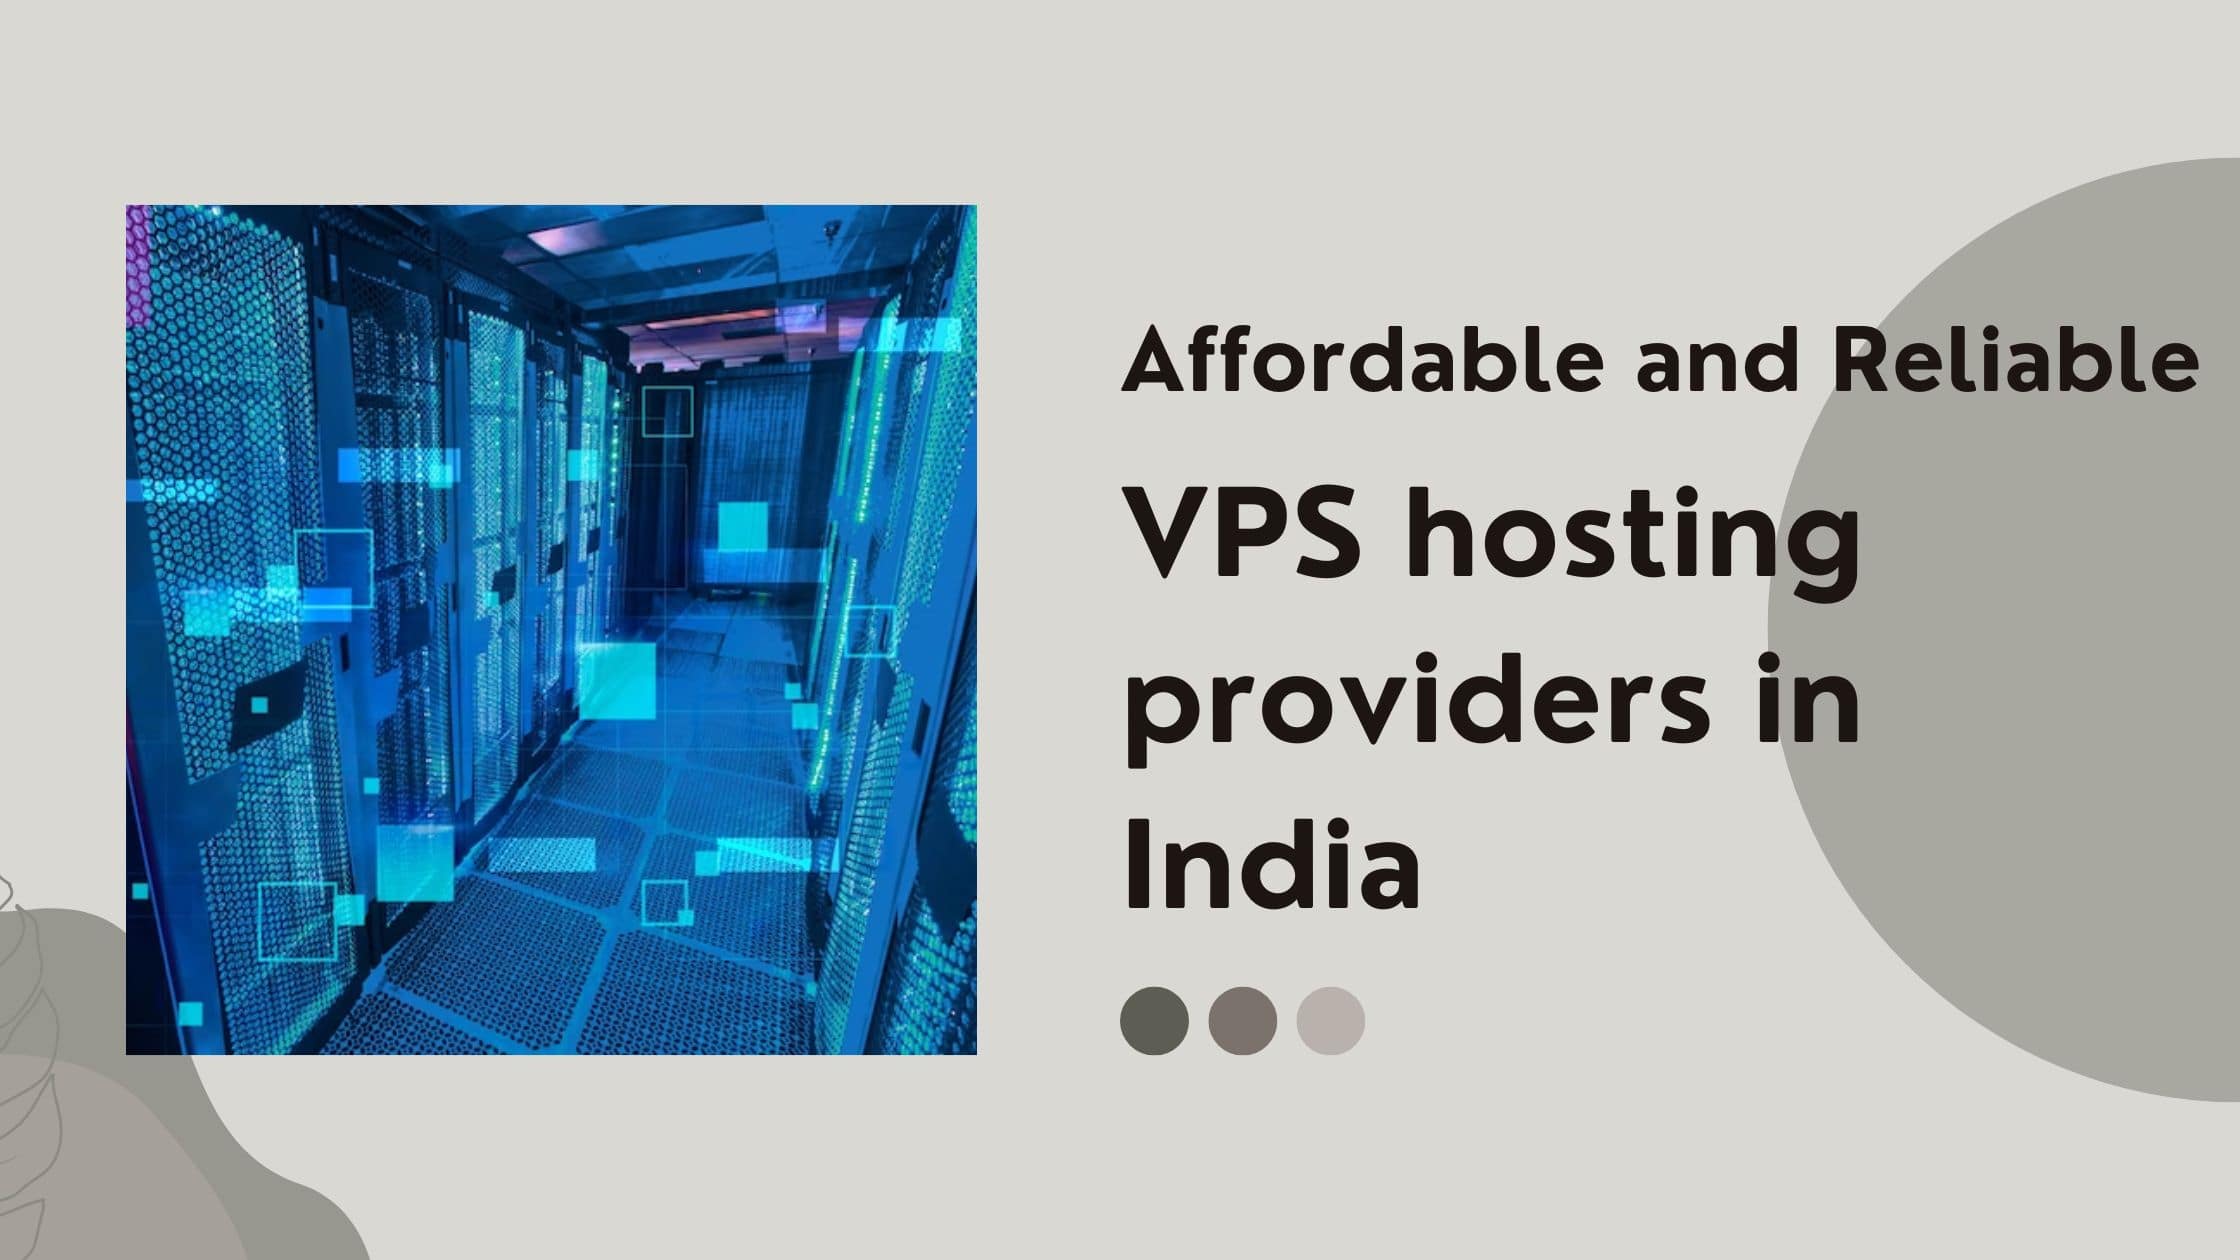 Affordable and Reliable VPS hosting providers in India